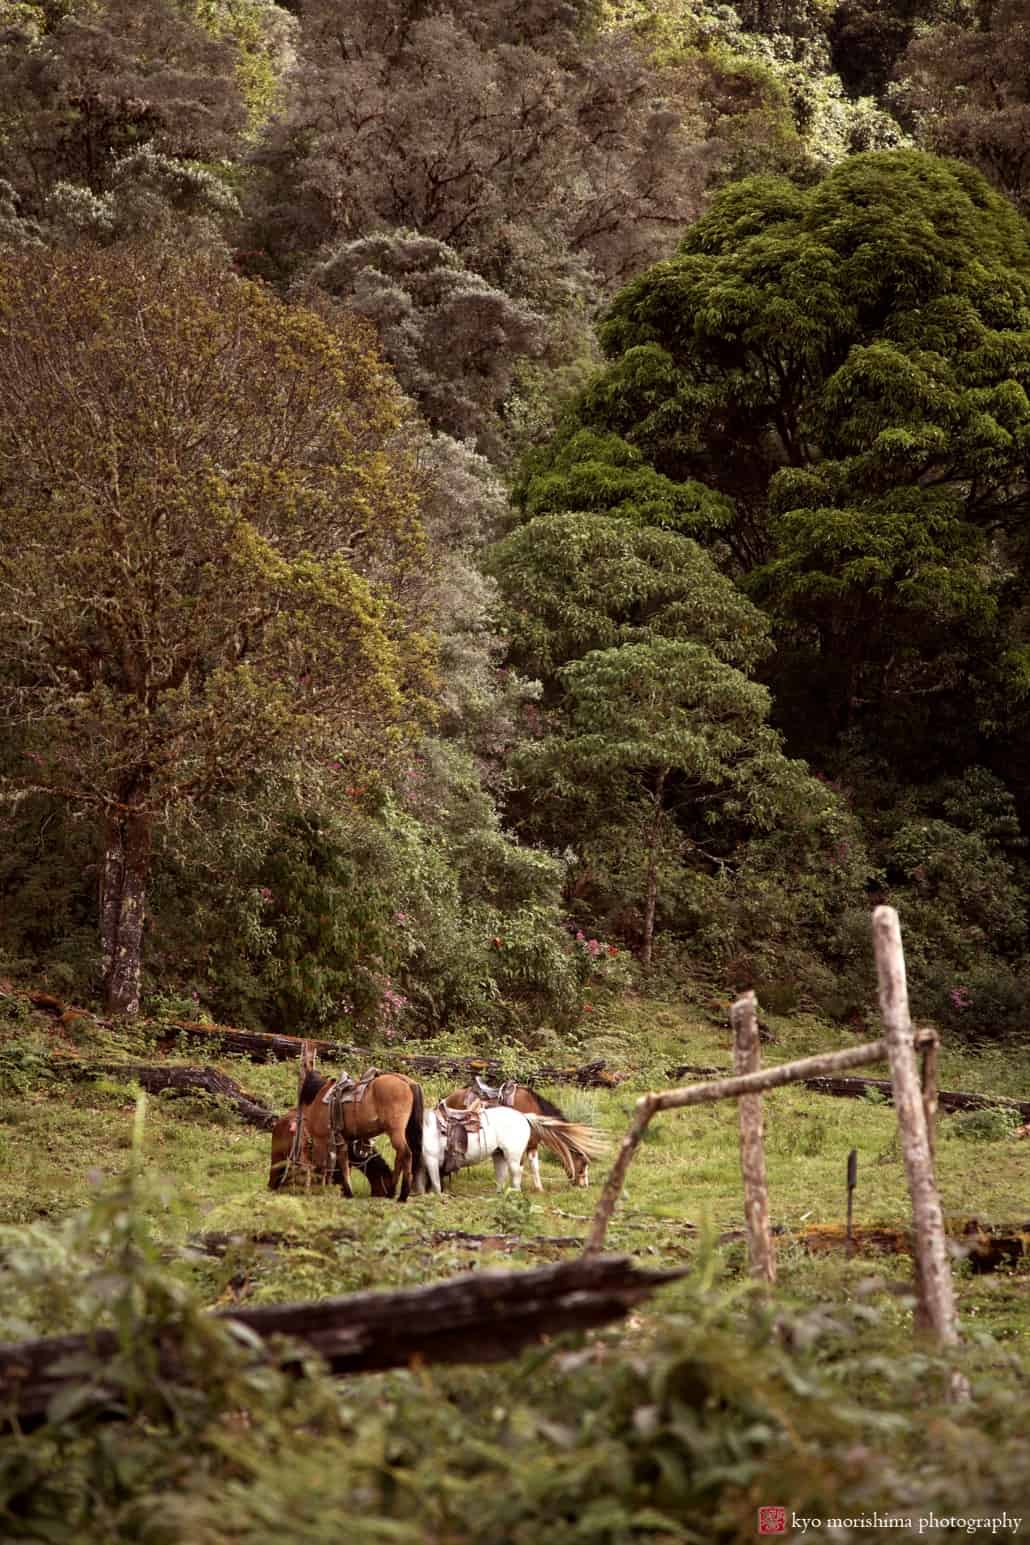 View of horses grazing in Costa Rica, photographed by Kyo Morishima